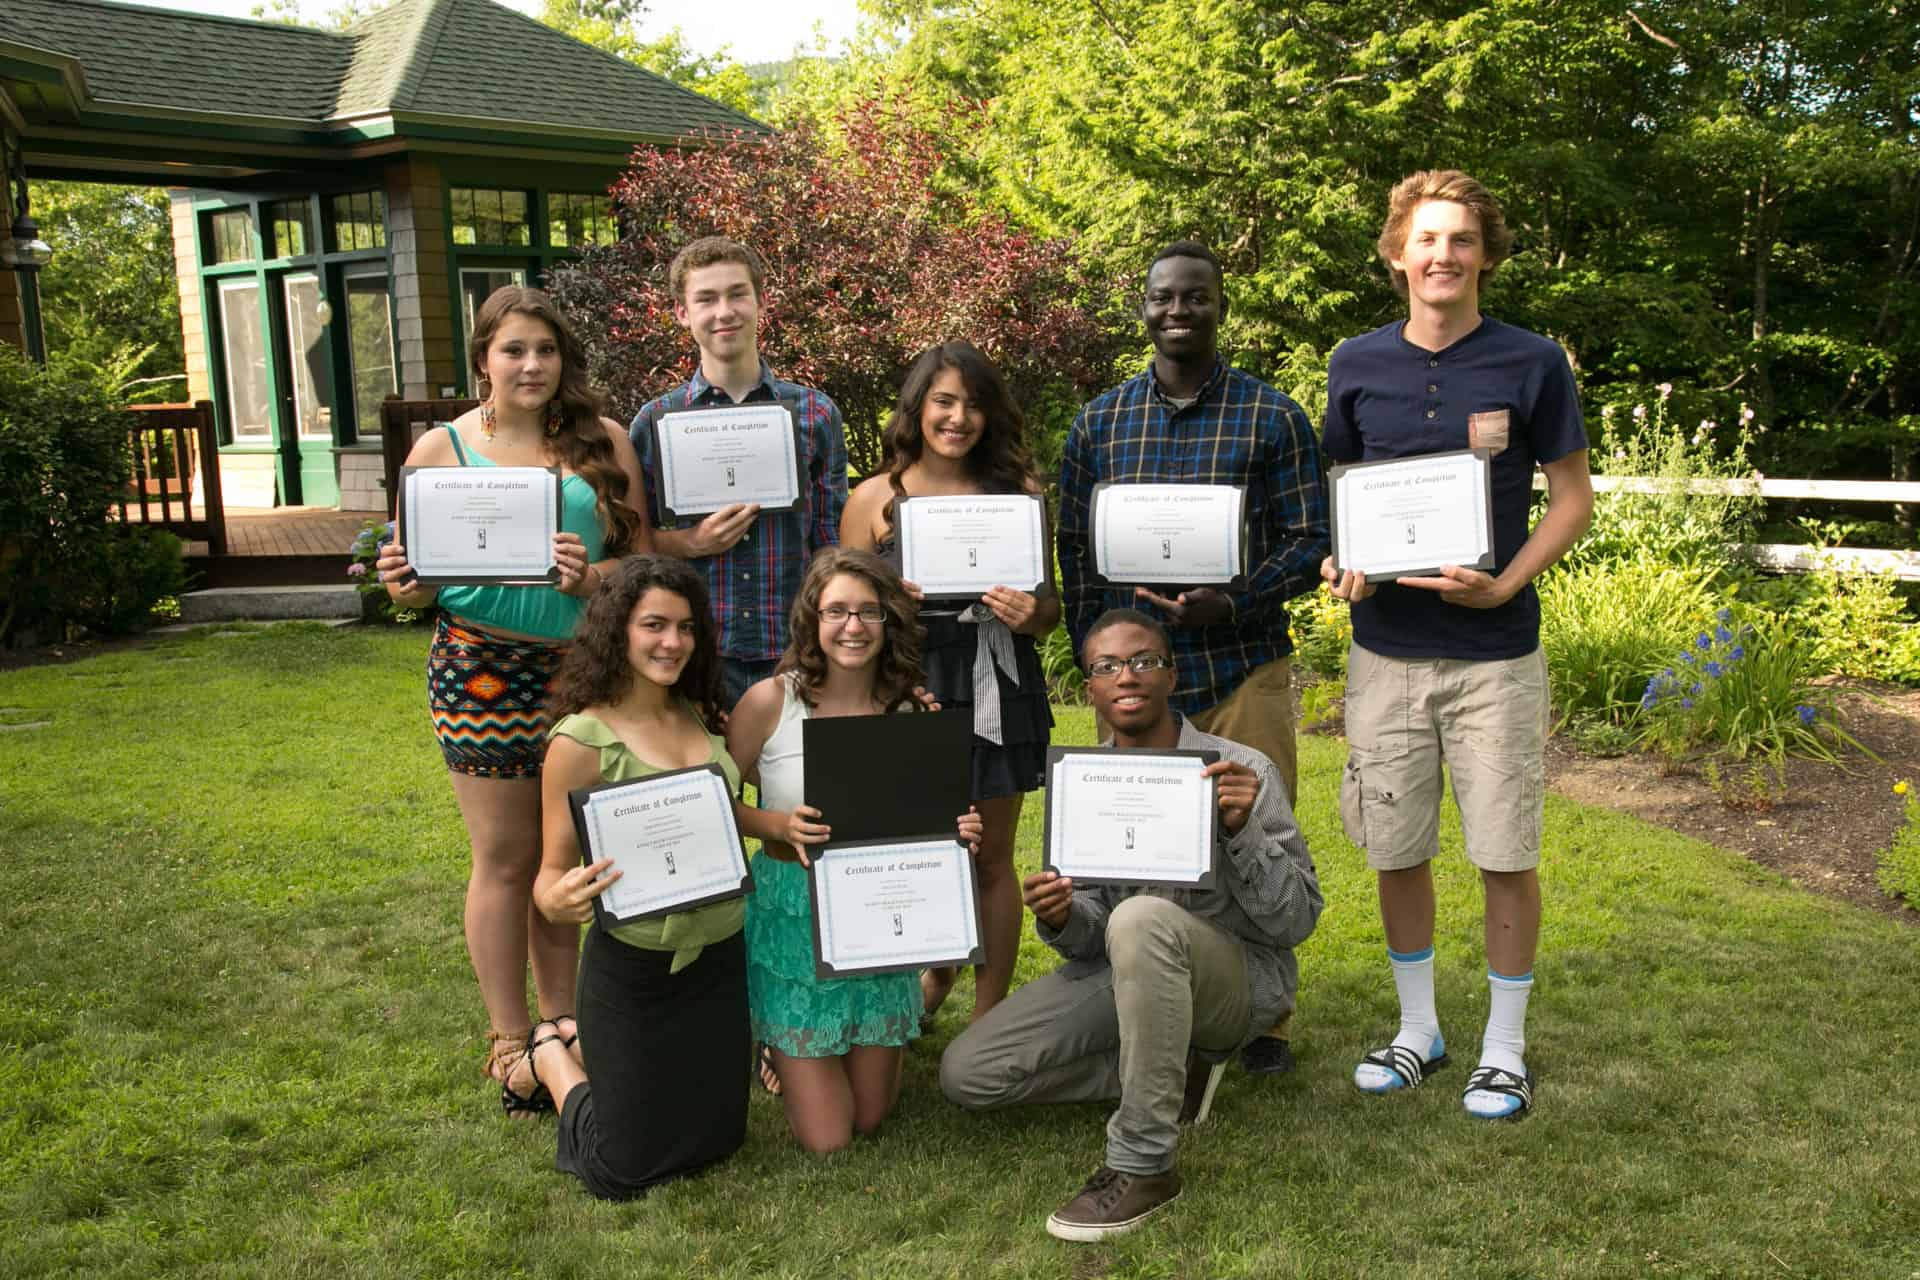 Gashim with his group at their Kismet graduation in 2014.